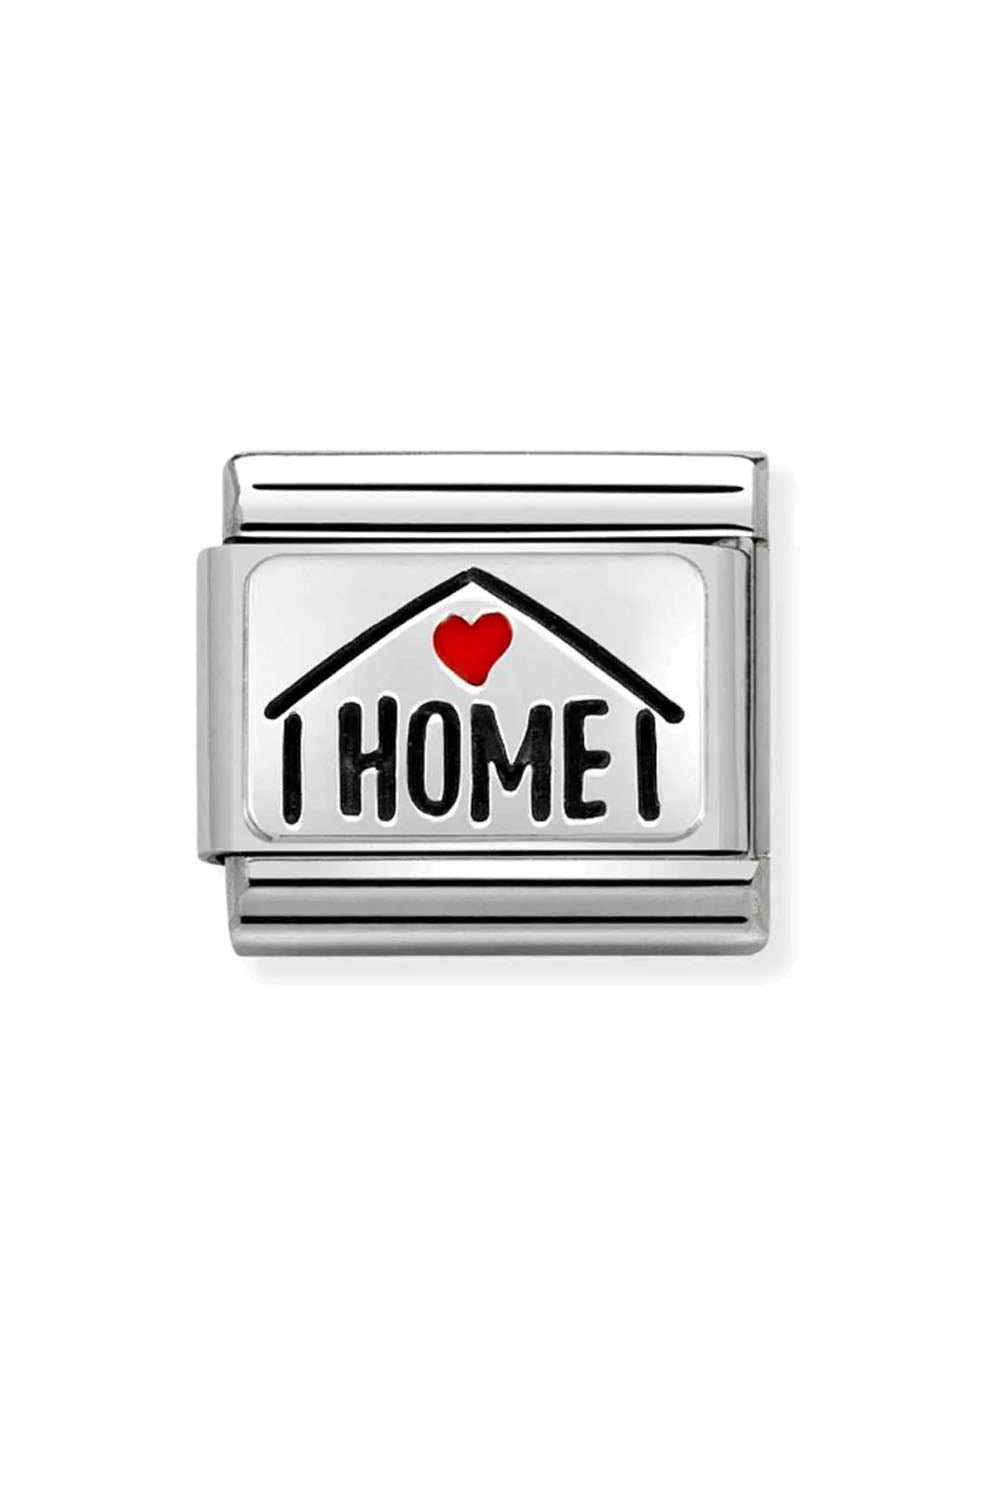 Oxidised plate 925 sterling Silver and Enamel Home with heart